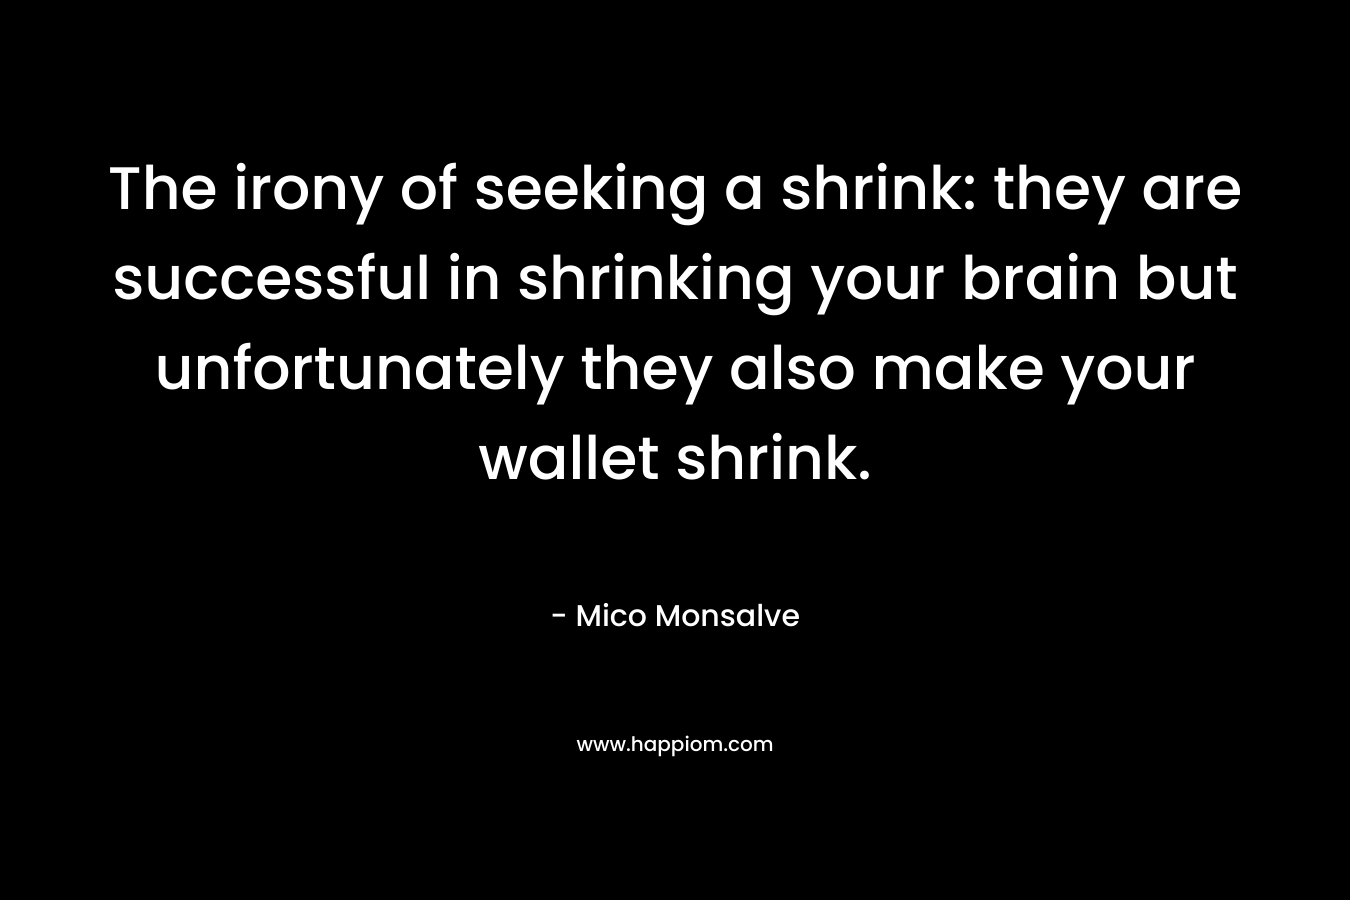 The irony of seeking a shrink: they are successful in shrinking your brain but unfortunately they also make your wallet shrink. – Mico Monsalve